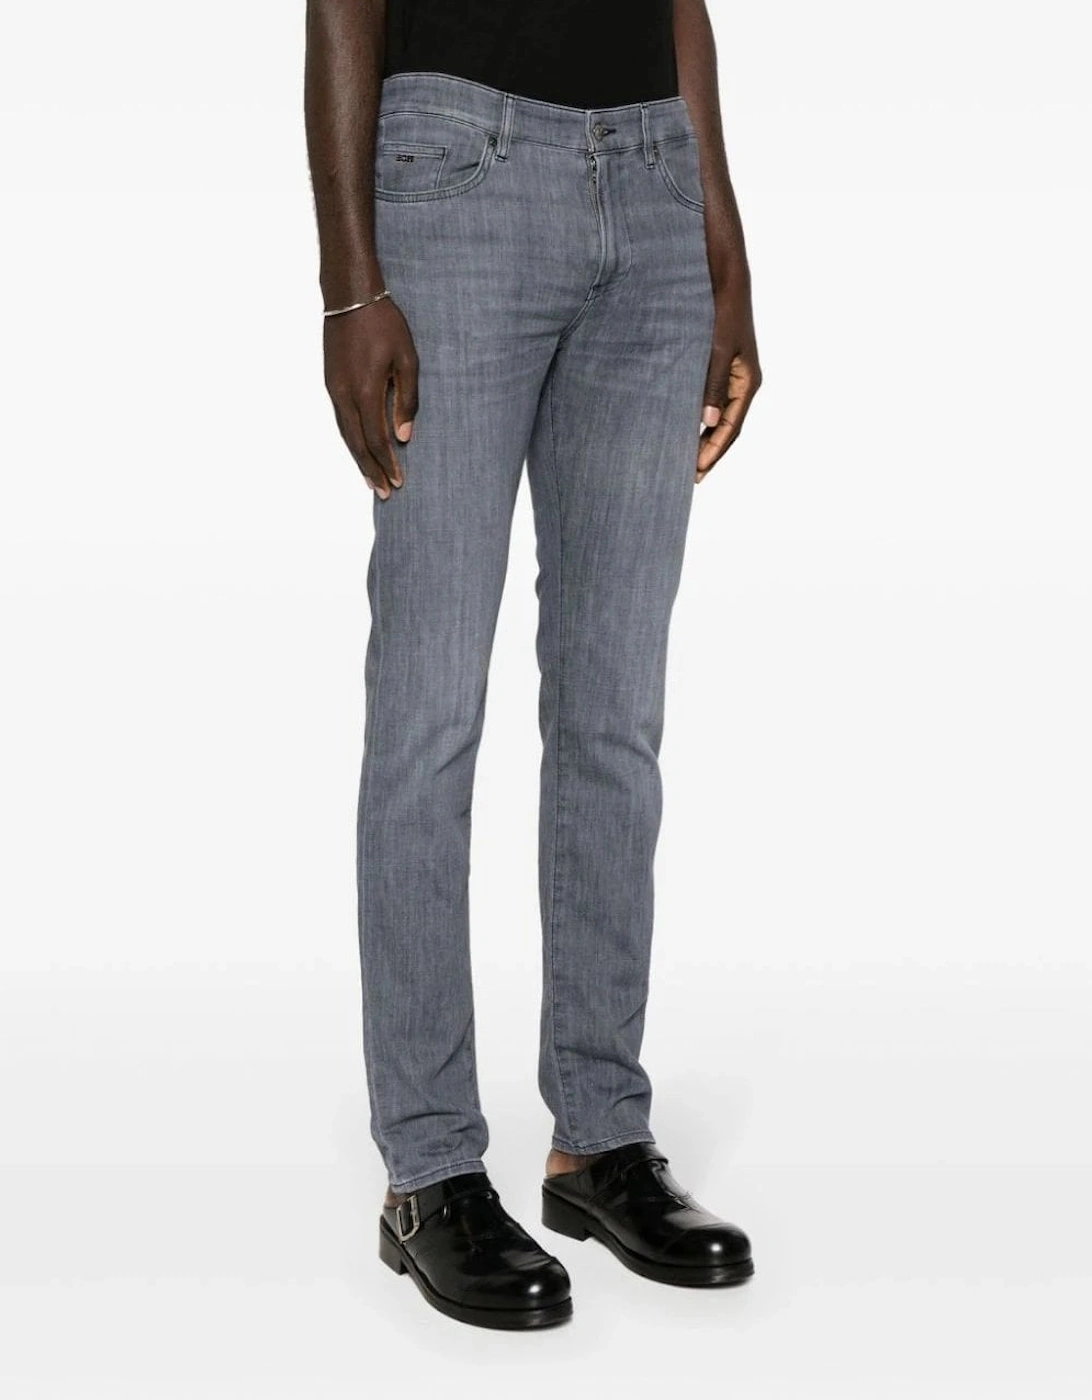 Delaware 3-1 Stretch Cotton Jeans Grey